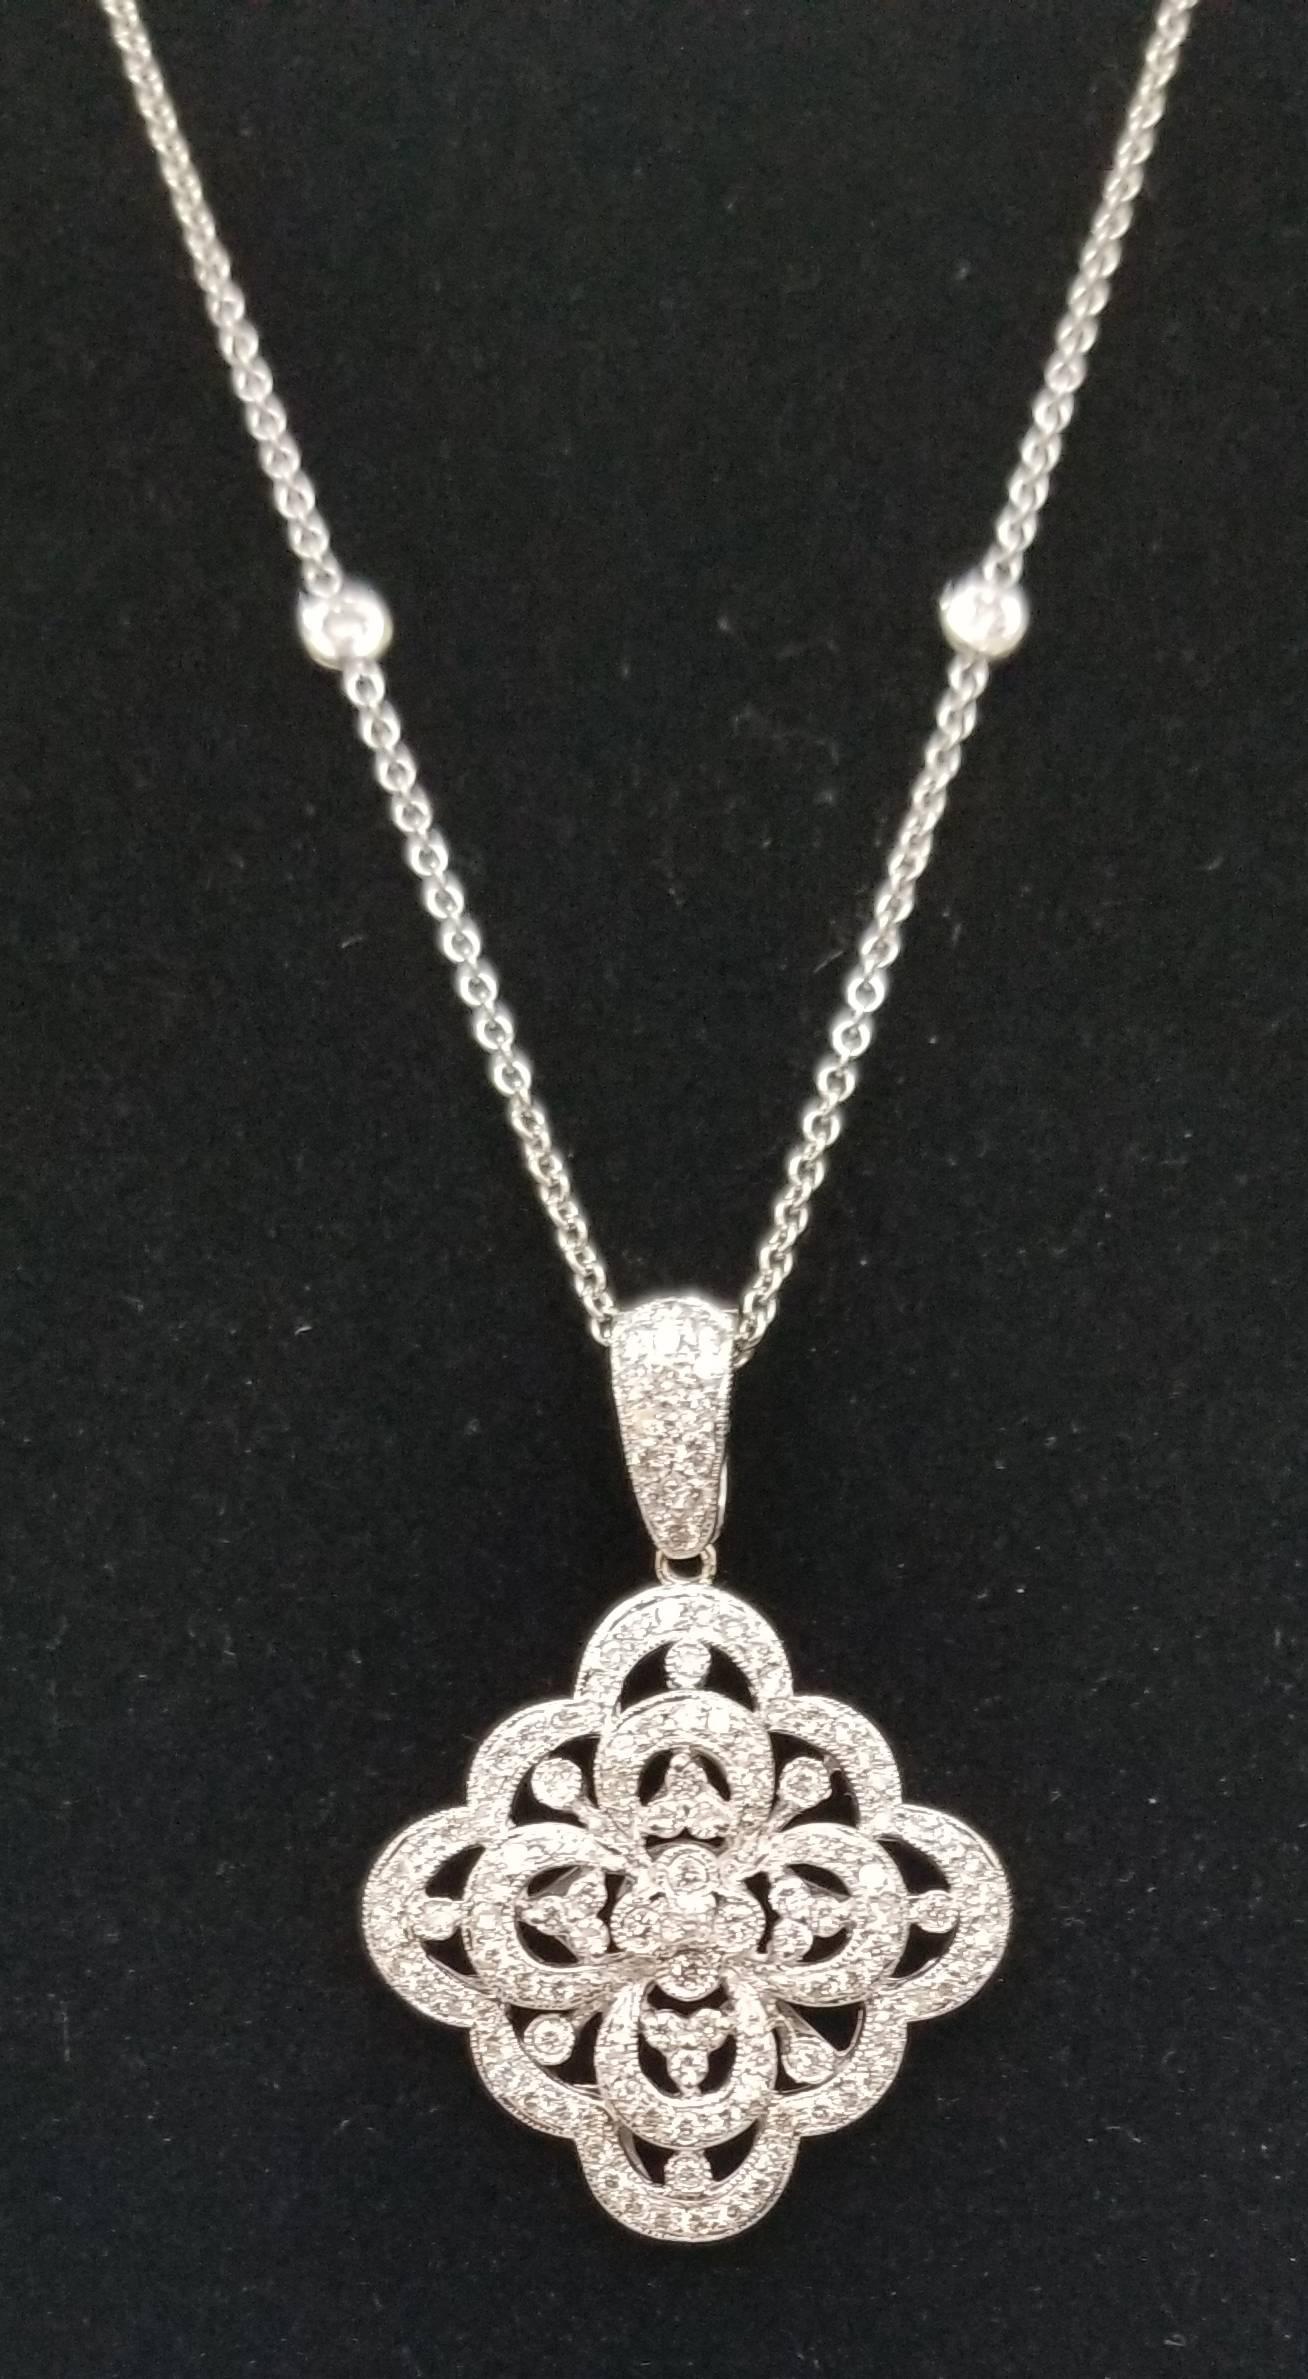 14k white gold diamond pendant, containing 125 round full cut diamonds of very fine quality weighing 1.50cts. set in a filigree setting on a 16 inch chain with 2 bezel set diamonds.